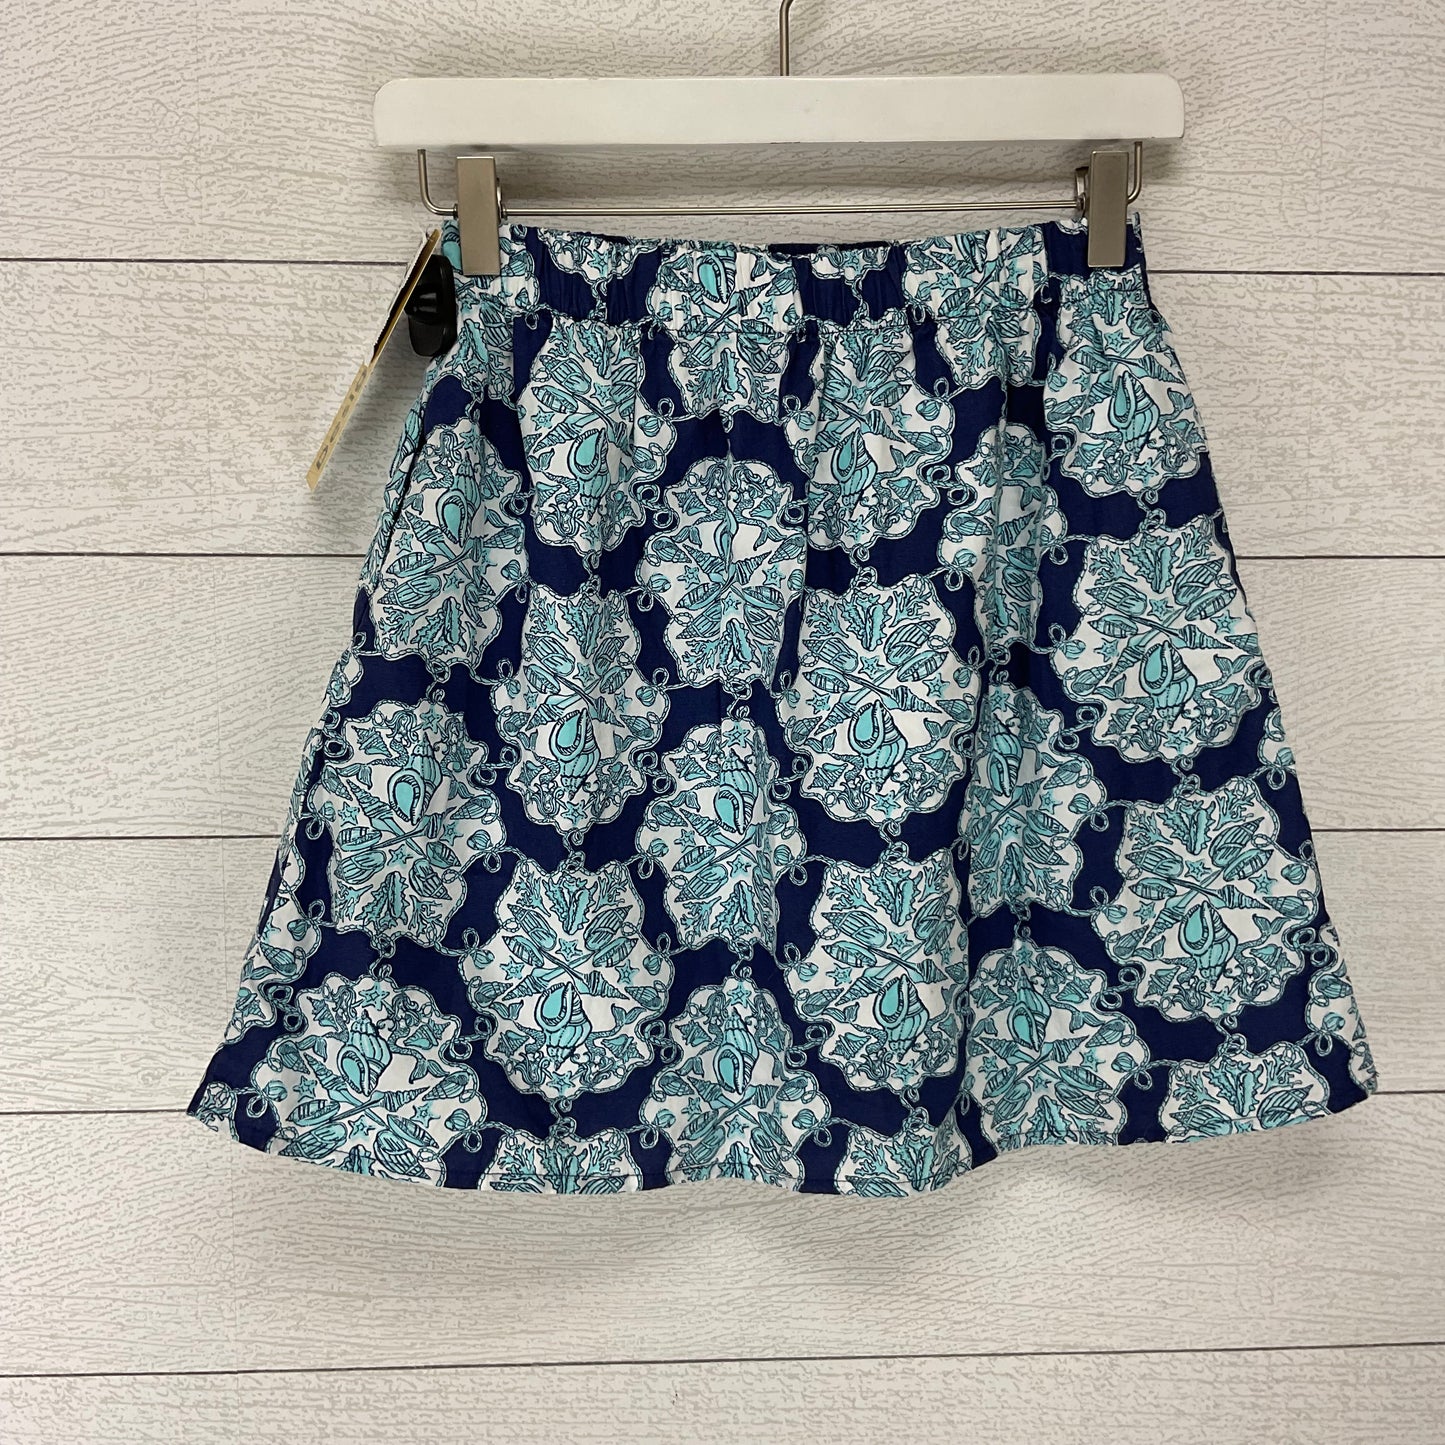 Skirt Designer By Lilly Pulitzer  Size: Xs